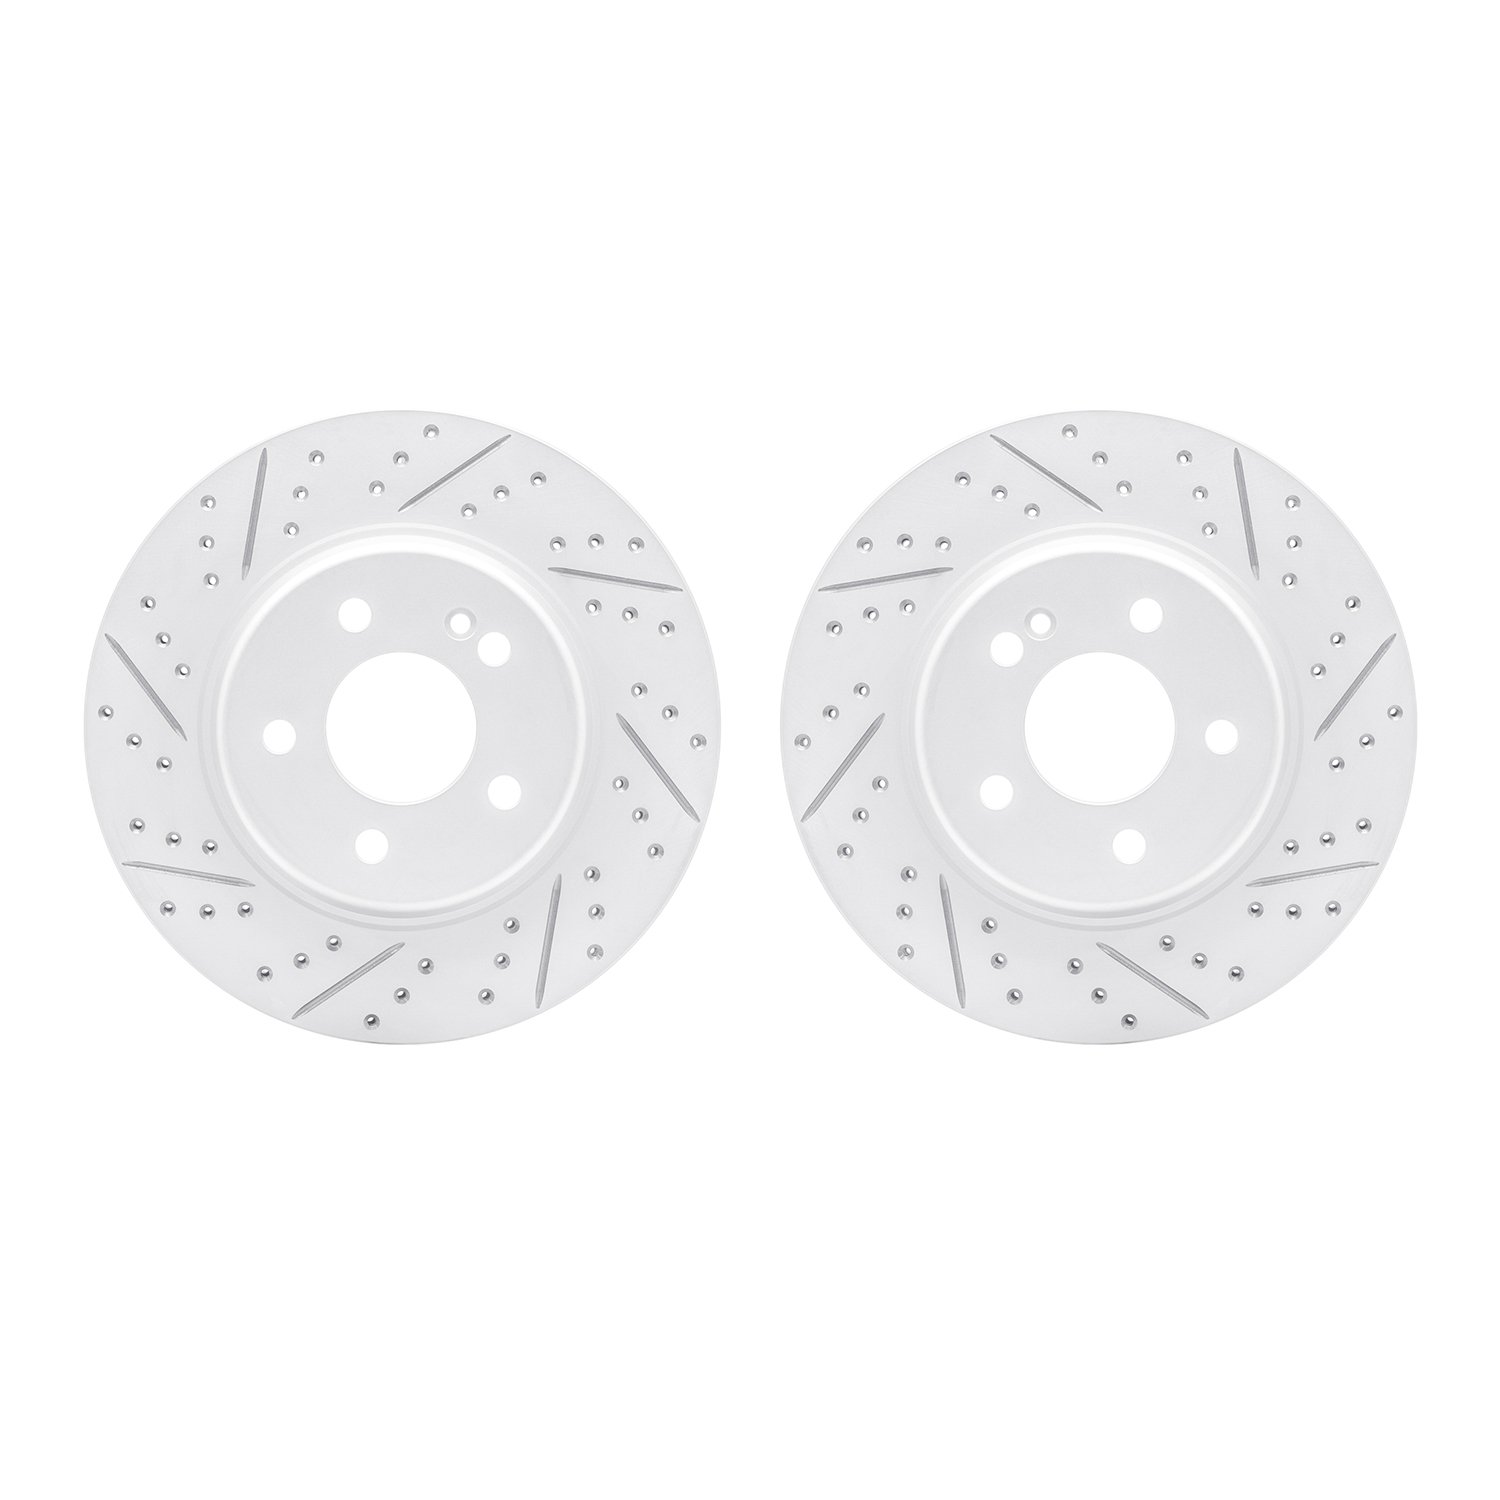 2002-63059 Geoperformance Drilled/Slotted Brake Rotors, Fits Select Mercedes-Benz, Position: Rear